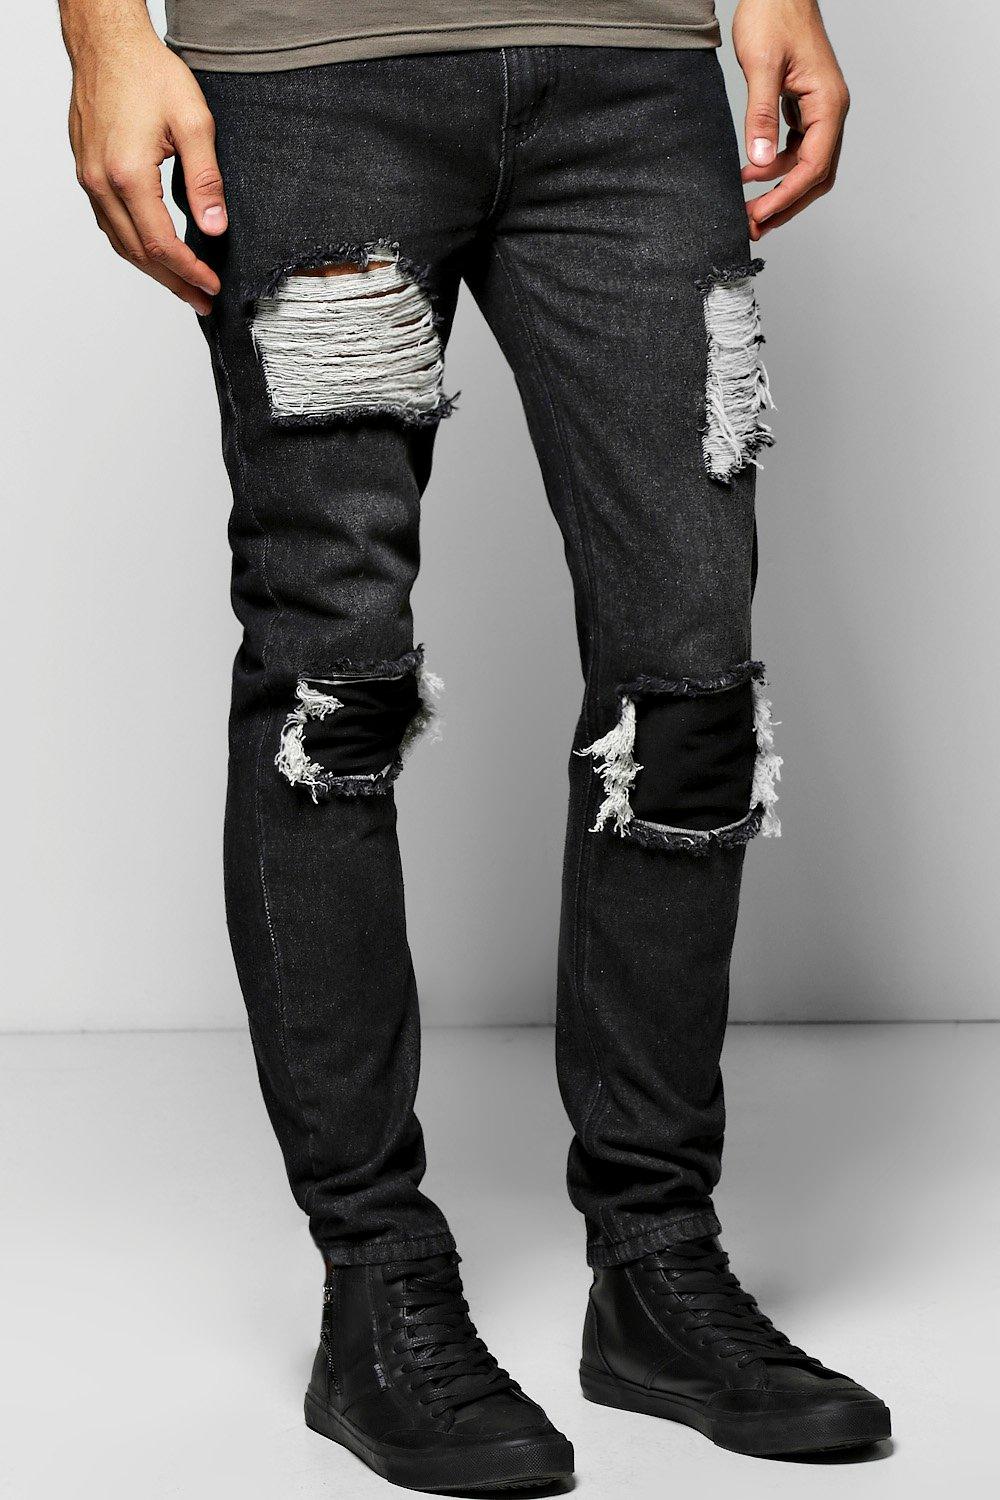 black ripped and repaired jeans